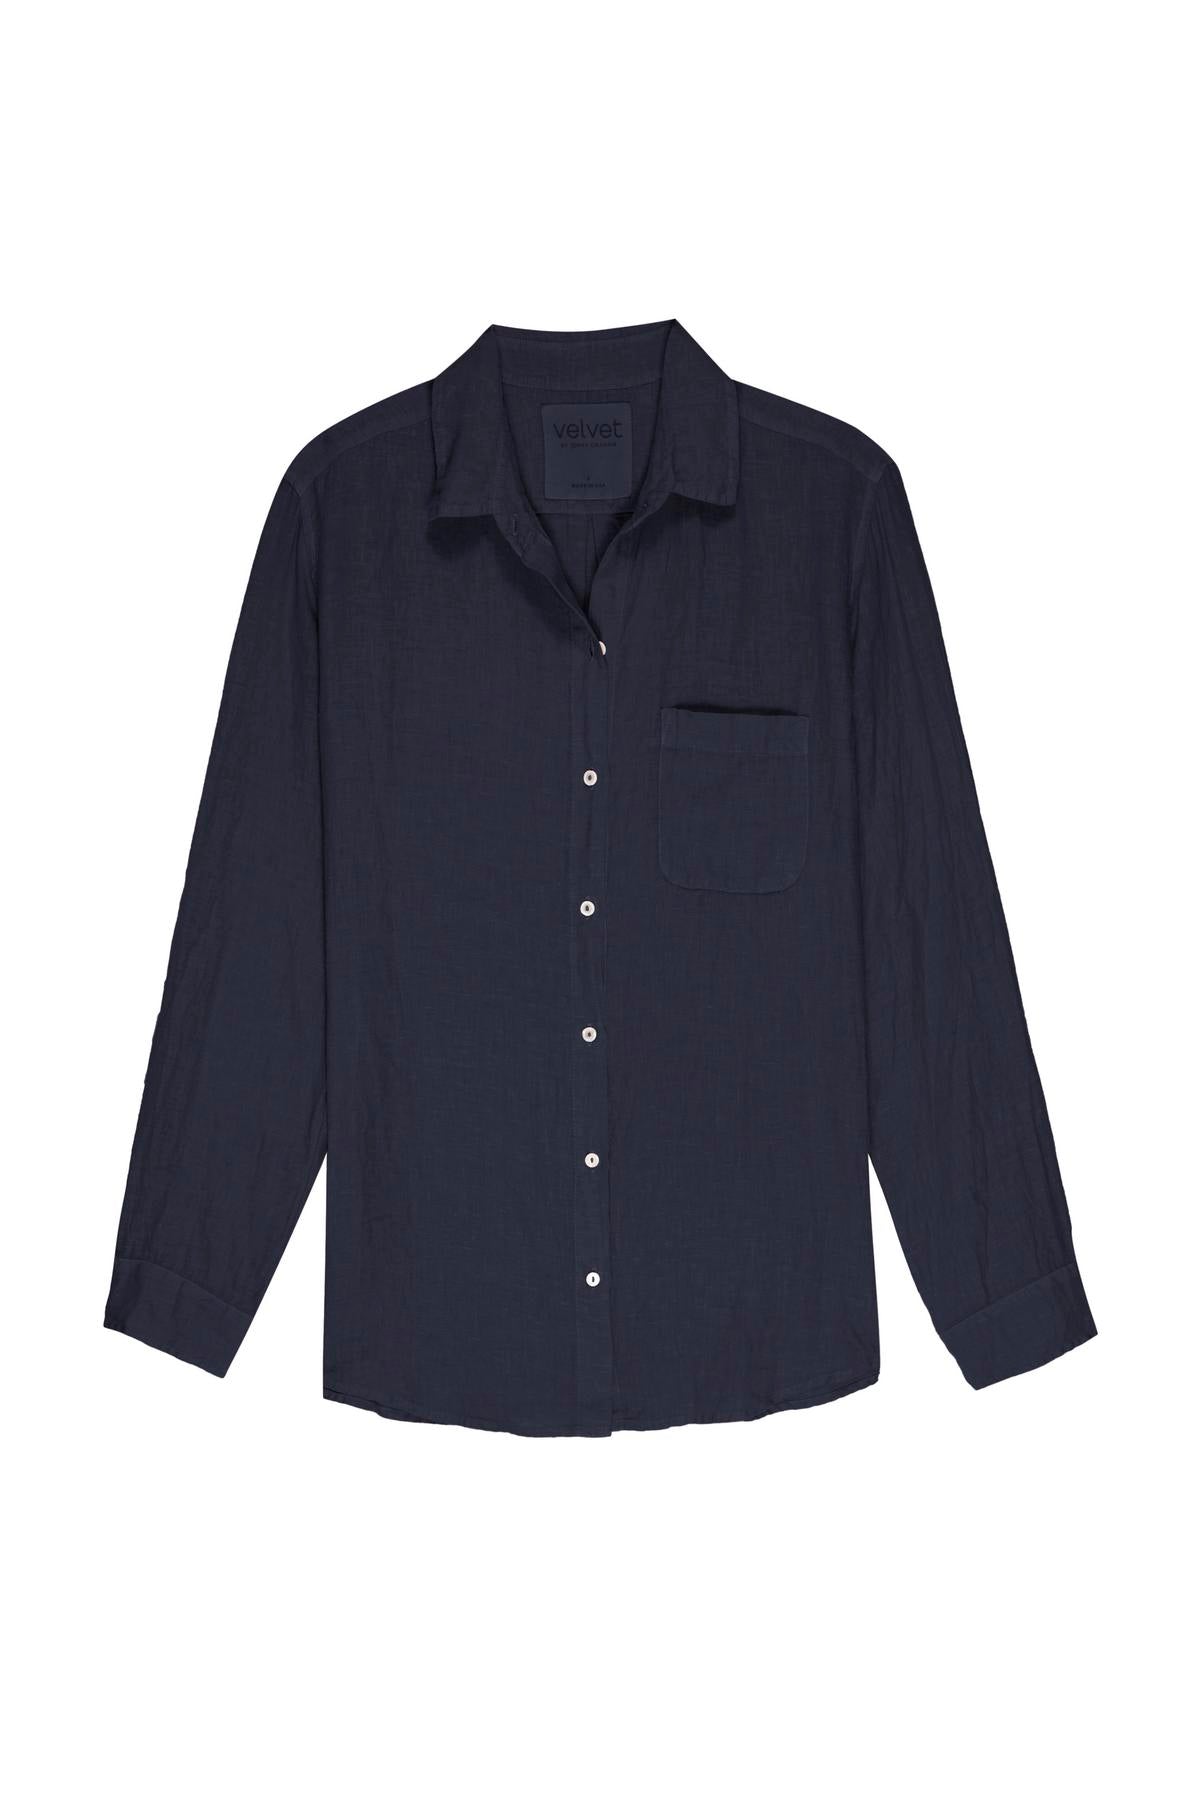   A long-sleeved, dark navy MULHOLLAND LINEN SHIRT by Velvet by Jenny Graham featuring a collar, a left chest pocket, and a relaxed silhouette. 